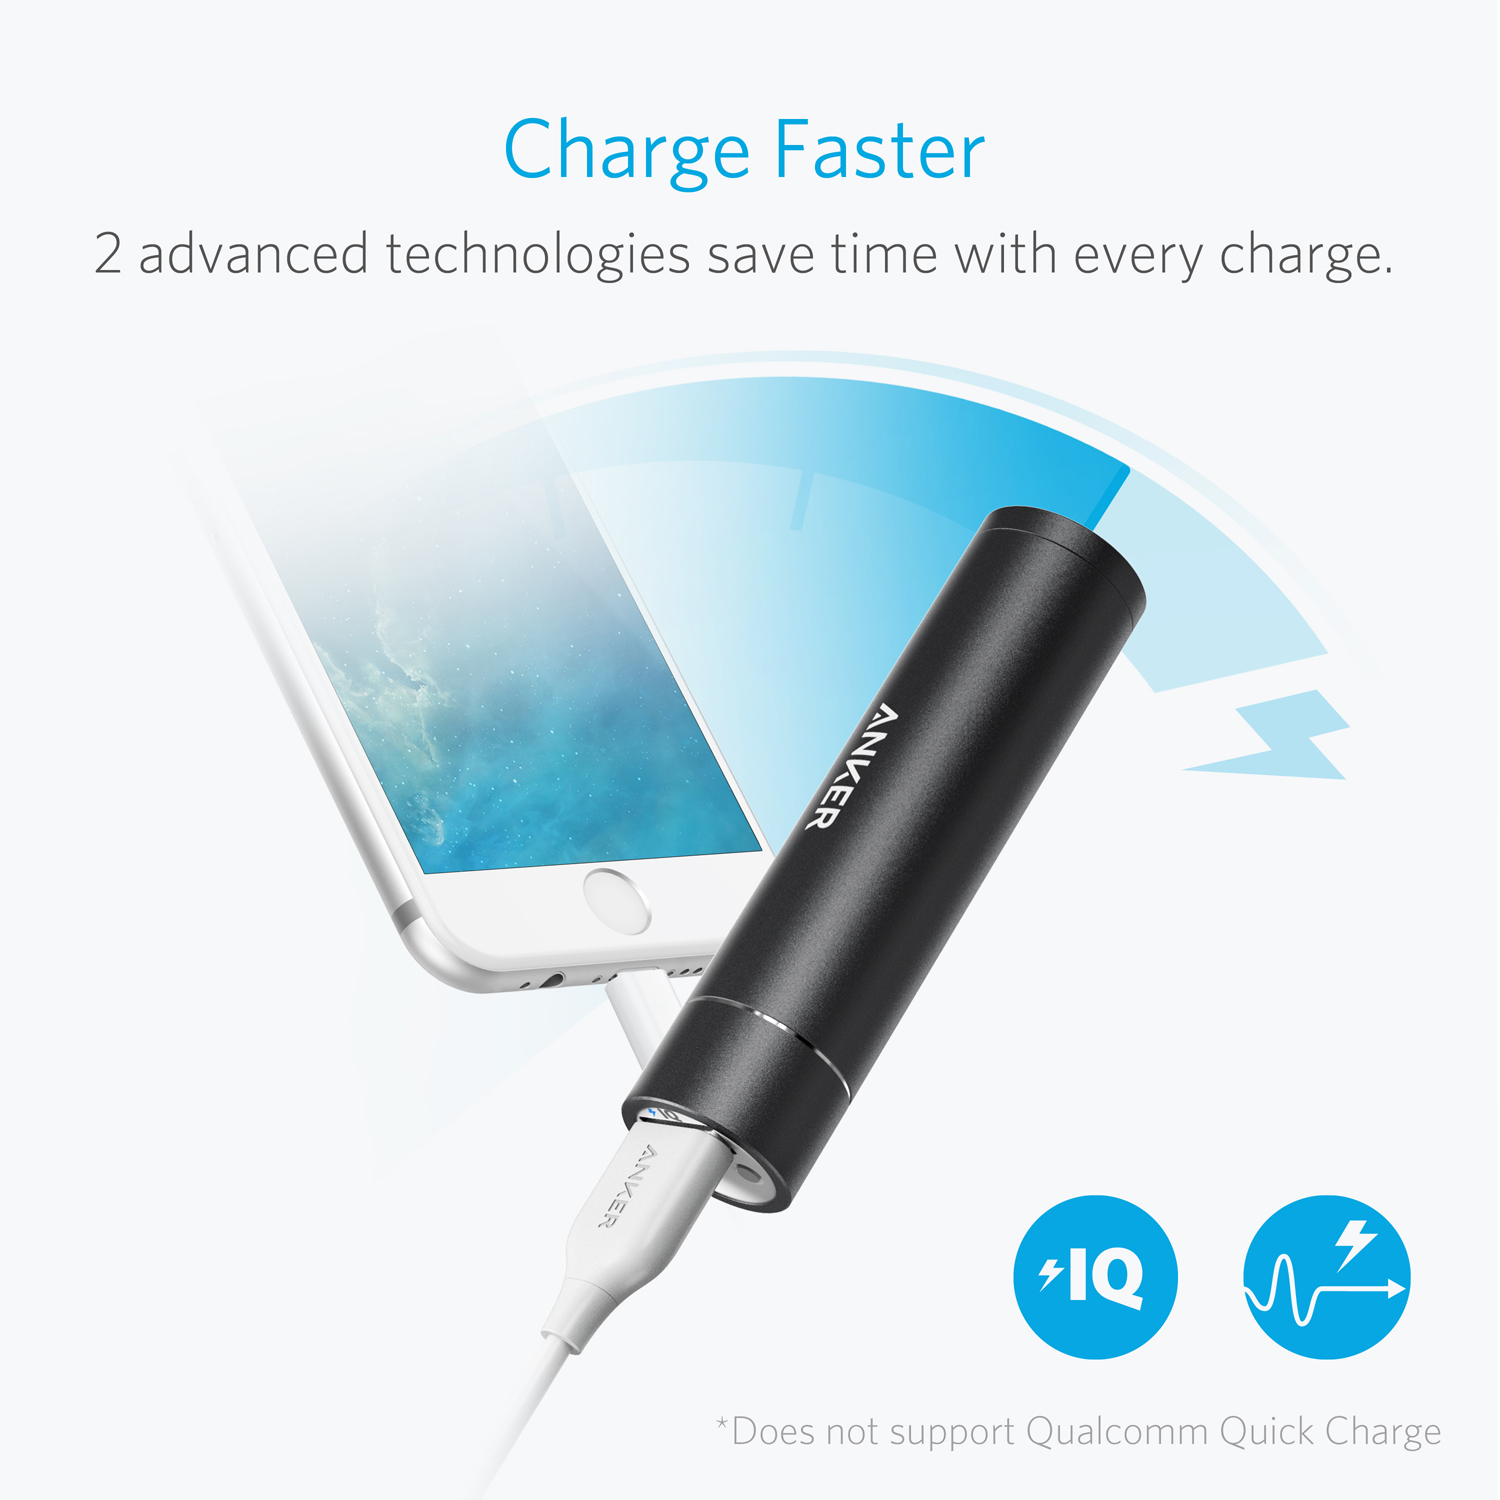 Anker PowerCore+ mini, 3350mAh Lipstick-Sized Portable Charger (3rd Generation, Premium Aluminum Power Bank), One of the Most Compact External Batteries - image 3 of 7